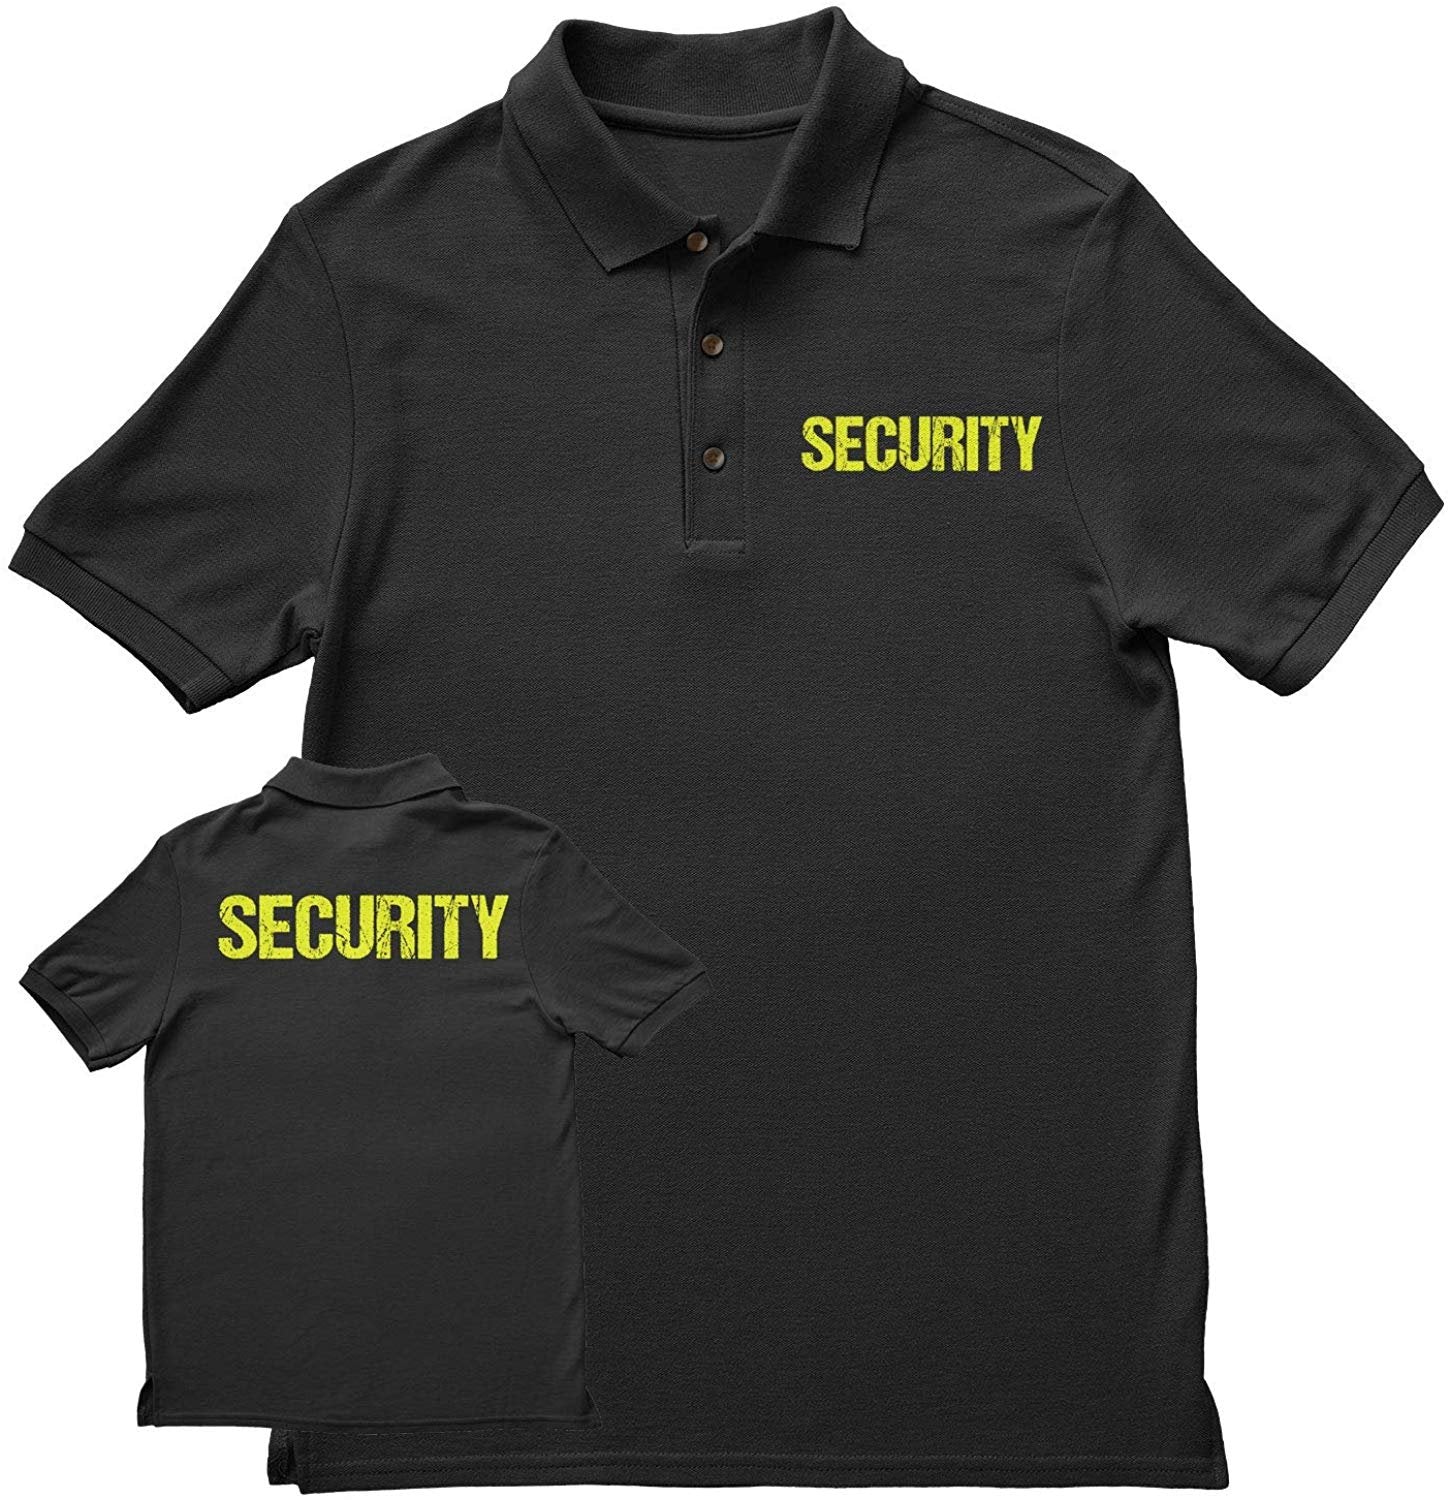 Security Polo Shirt Front & Back Print (Distressed, Black & Neon)